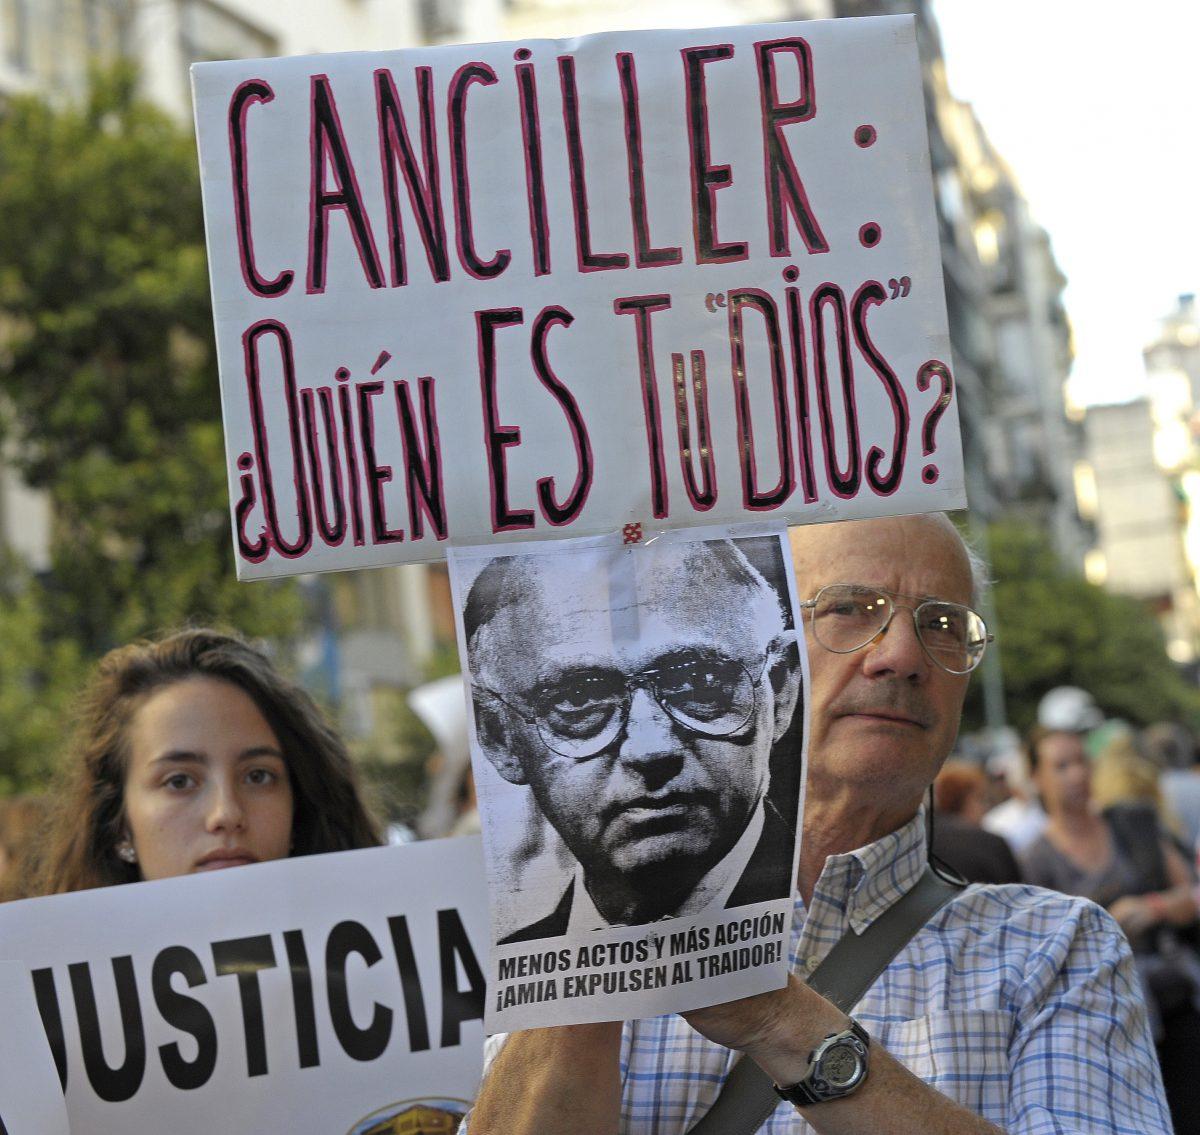 A man holds a placard with the picture of Argentinian Foreign Minister Hector Timerman and another one that reads "Foreign Minister: Who Is Your God" during a rally in front of the headquarters of the AMIA (Argentine Israelite Mutual Association), in Buenos Aires on January 21, 2015, to protest against the death of Argentine public prosecutor Alberto Nisman, who was found shot dead earlier, just days after accusing former President Cristina Fernández de Kirchner of obstructing a probe into a 1994 Jewish center bombing that killed 85 peiople and injured another 300. Nisman, 51, who was just hours away from testifying at a congressional hearing, was found dead overnight in his apartment in the trendy Puerto Madero neighbourhood of the capital. "I can confirm that a 22-caliber handgun was found beside the body," prosecutor Viviana Fein said. The nation's top security official said Nisman appears to have committed suicide. (Alejandro Pagni/AFP/Getty Images)